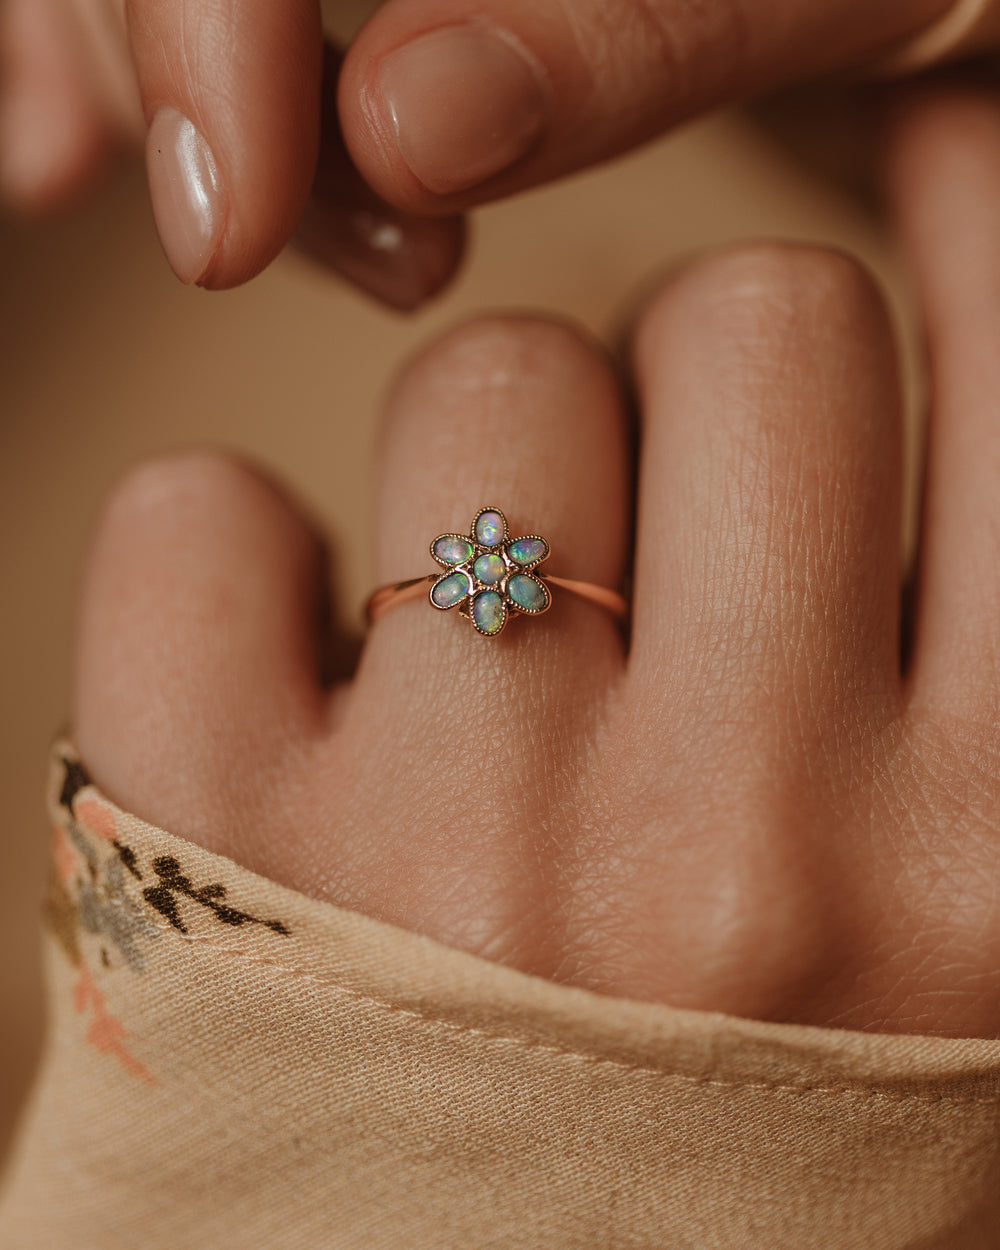 Annis Antique 9ct Gold Opal Flowerhead Cluster Ring